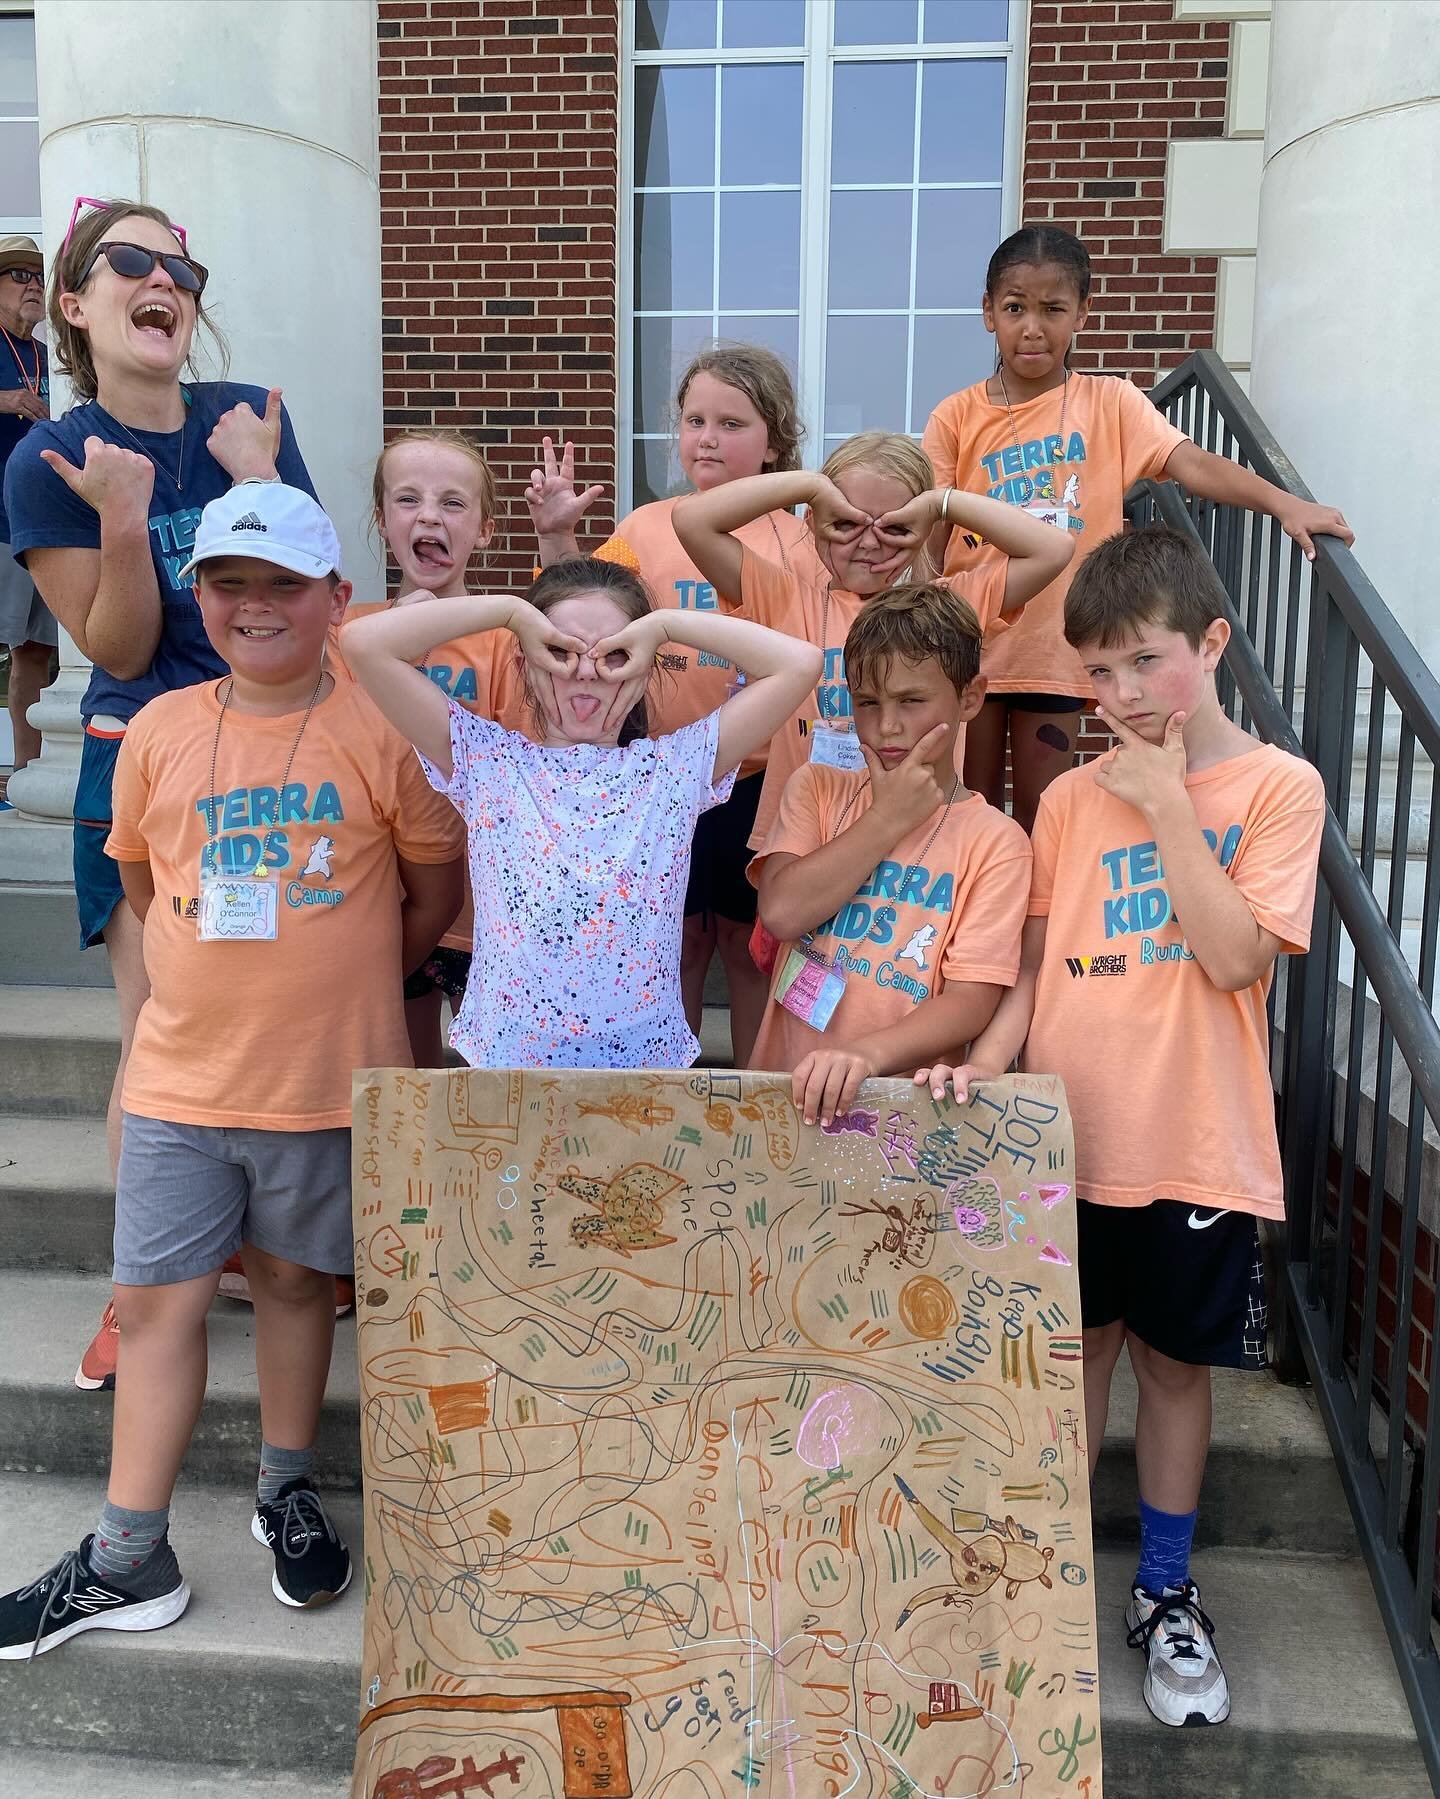 Registration for Summer 2024 Terra Kids Run Camp is NOW OPEN! Sign up your rising 1st-6th grader to join us for a week of running fundamentals, crafts, games, and FUN at no cost, thanks to the generous sponsorship of Wright Brothers Construction Comp